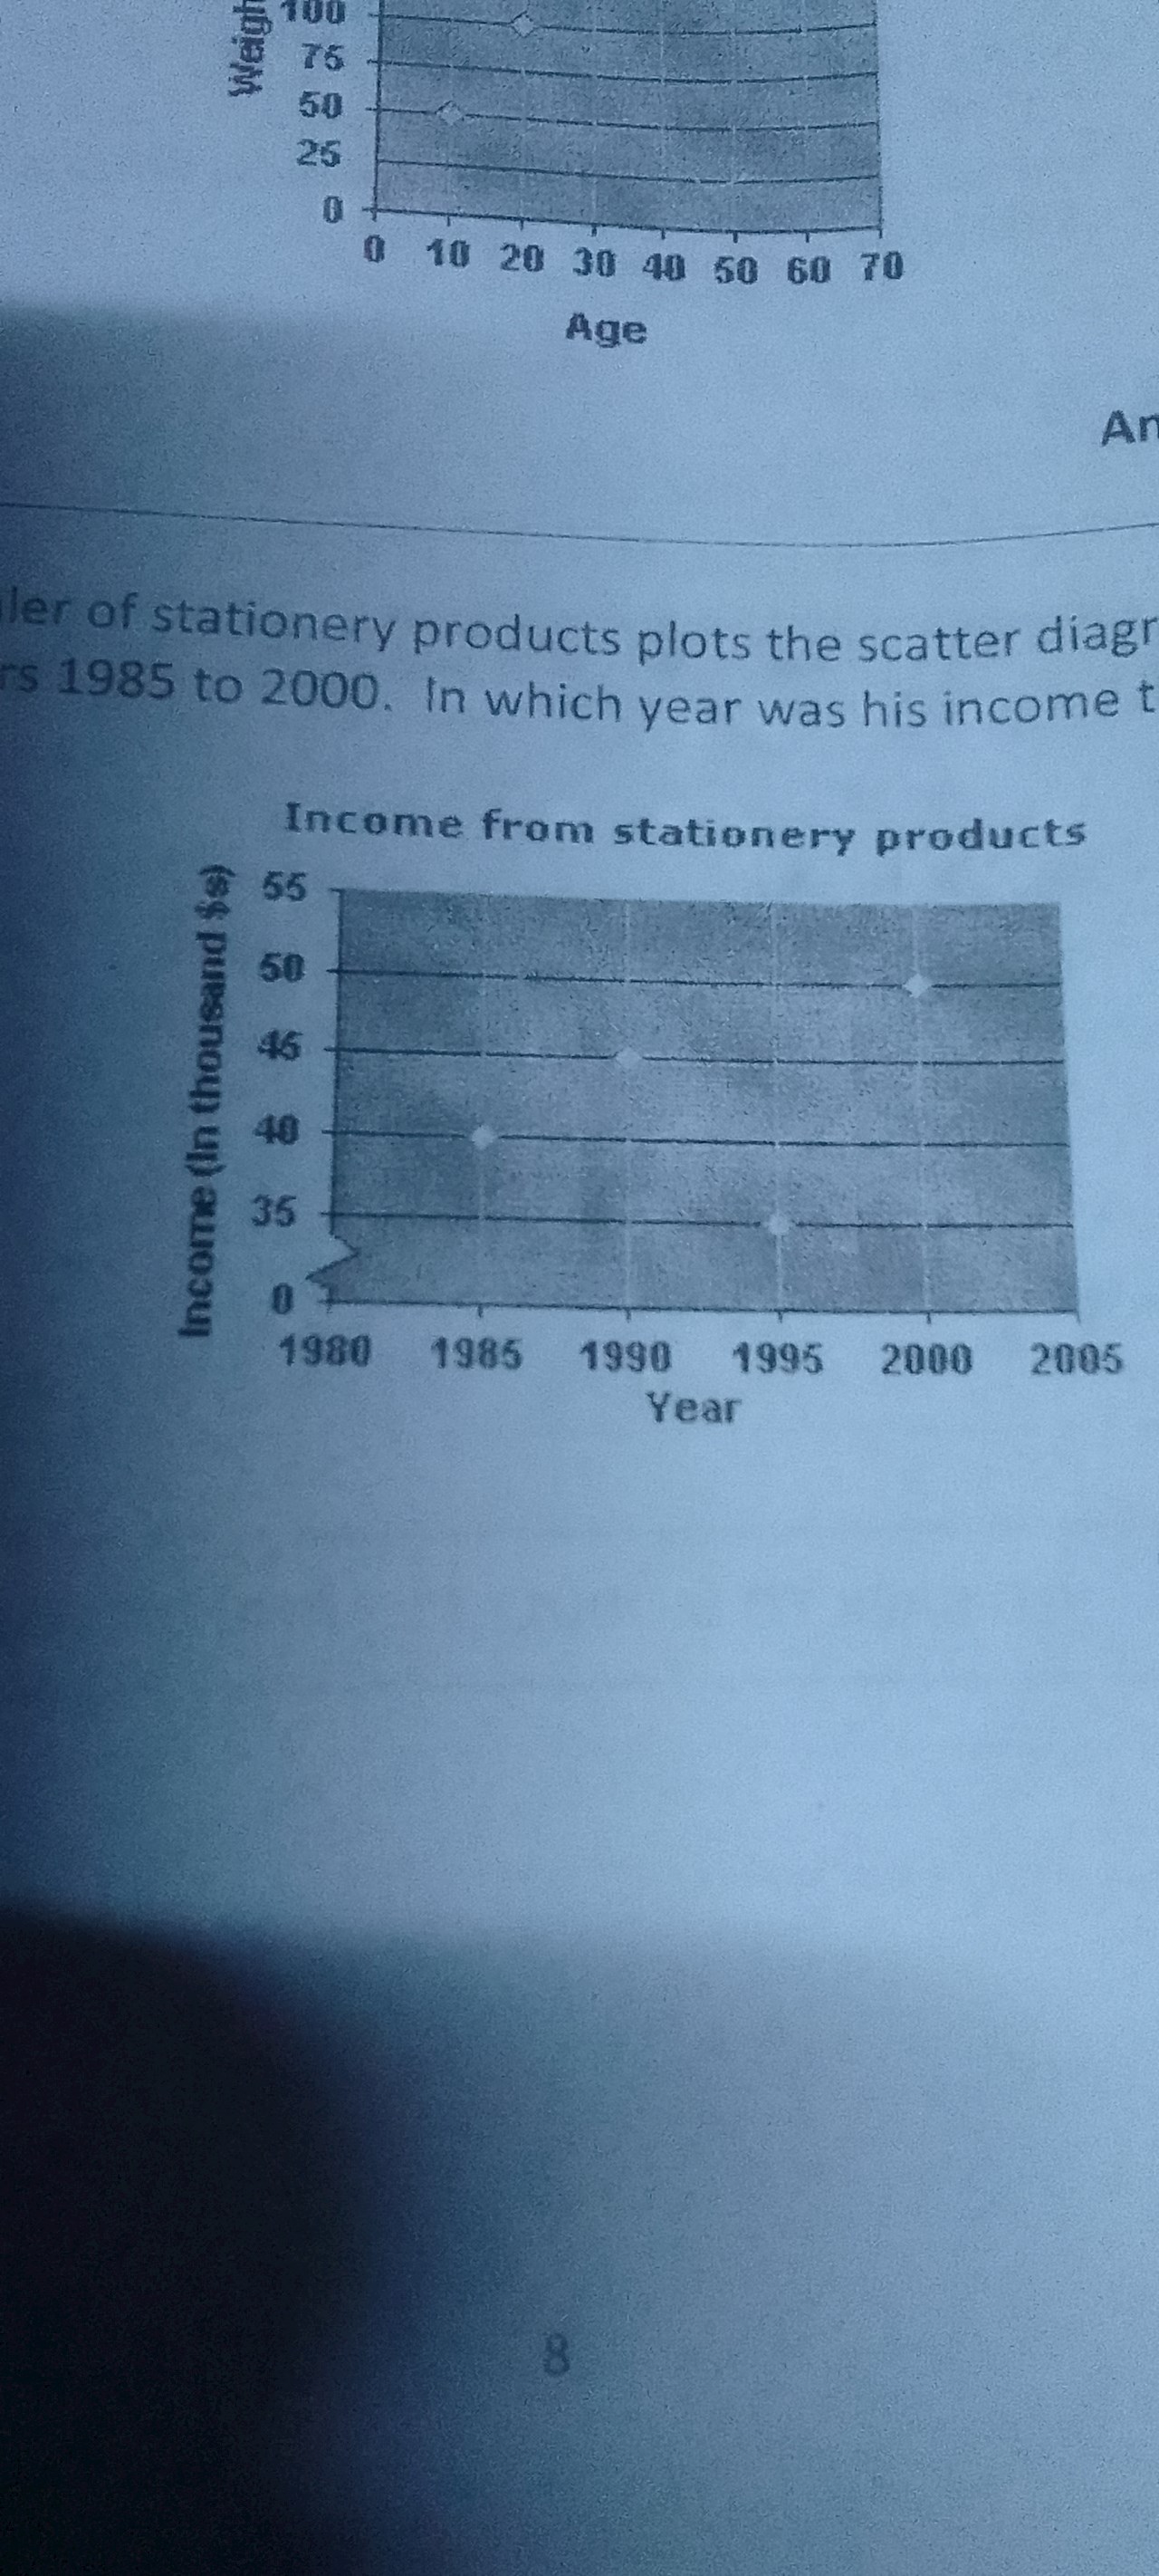 A wholesale dealer of stationery products plots the scatter diagram of his income through the years 1985 to 2000. In which year was his income the highest?